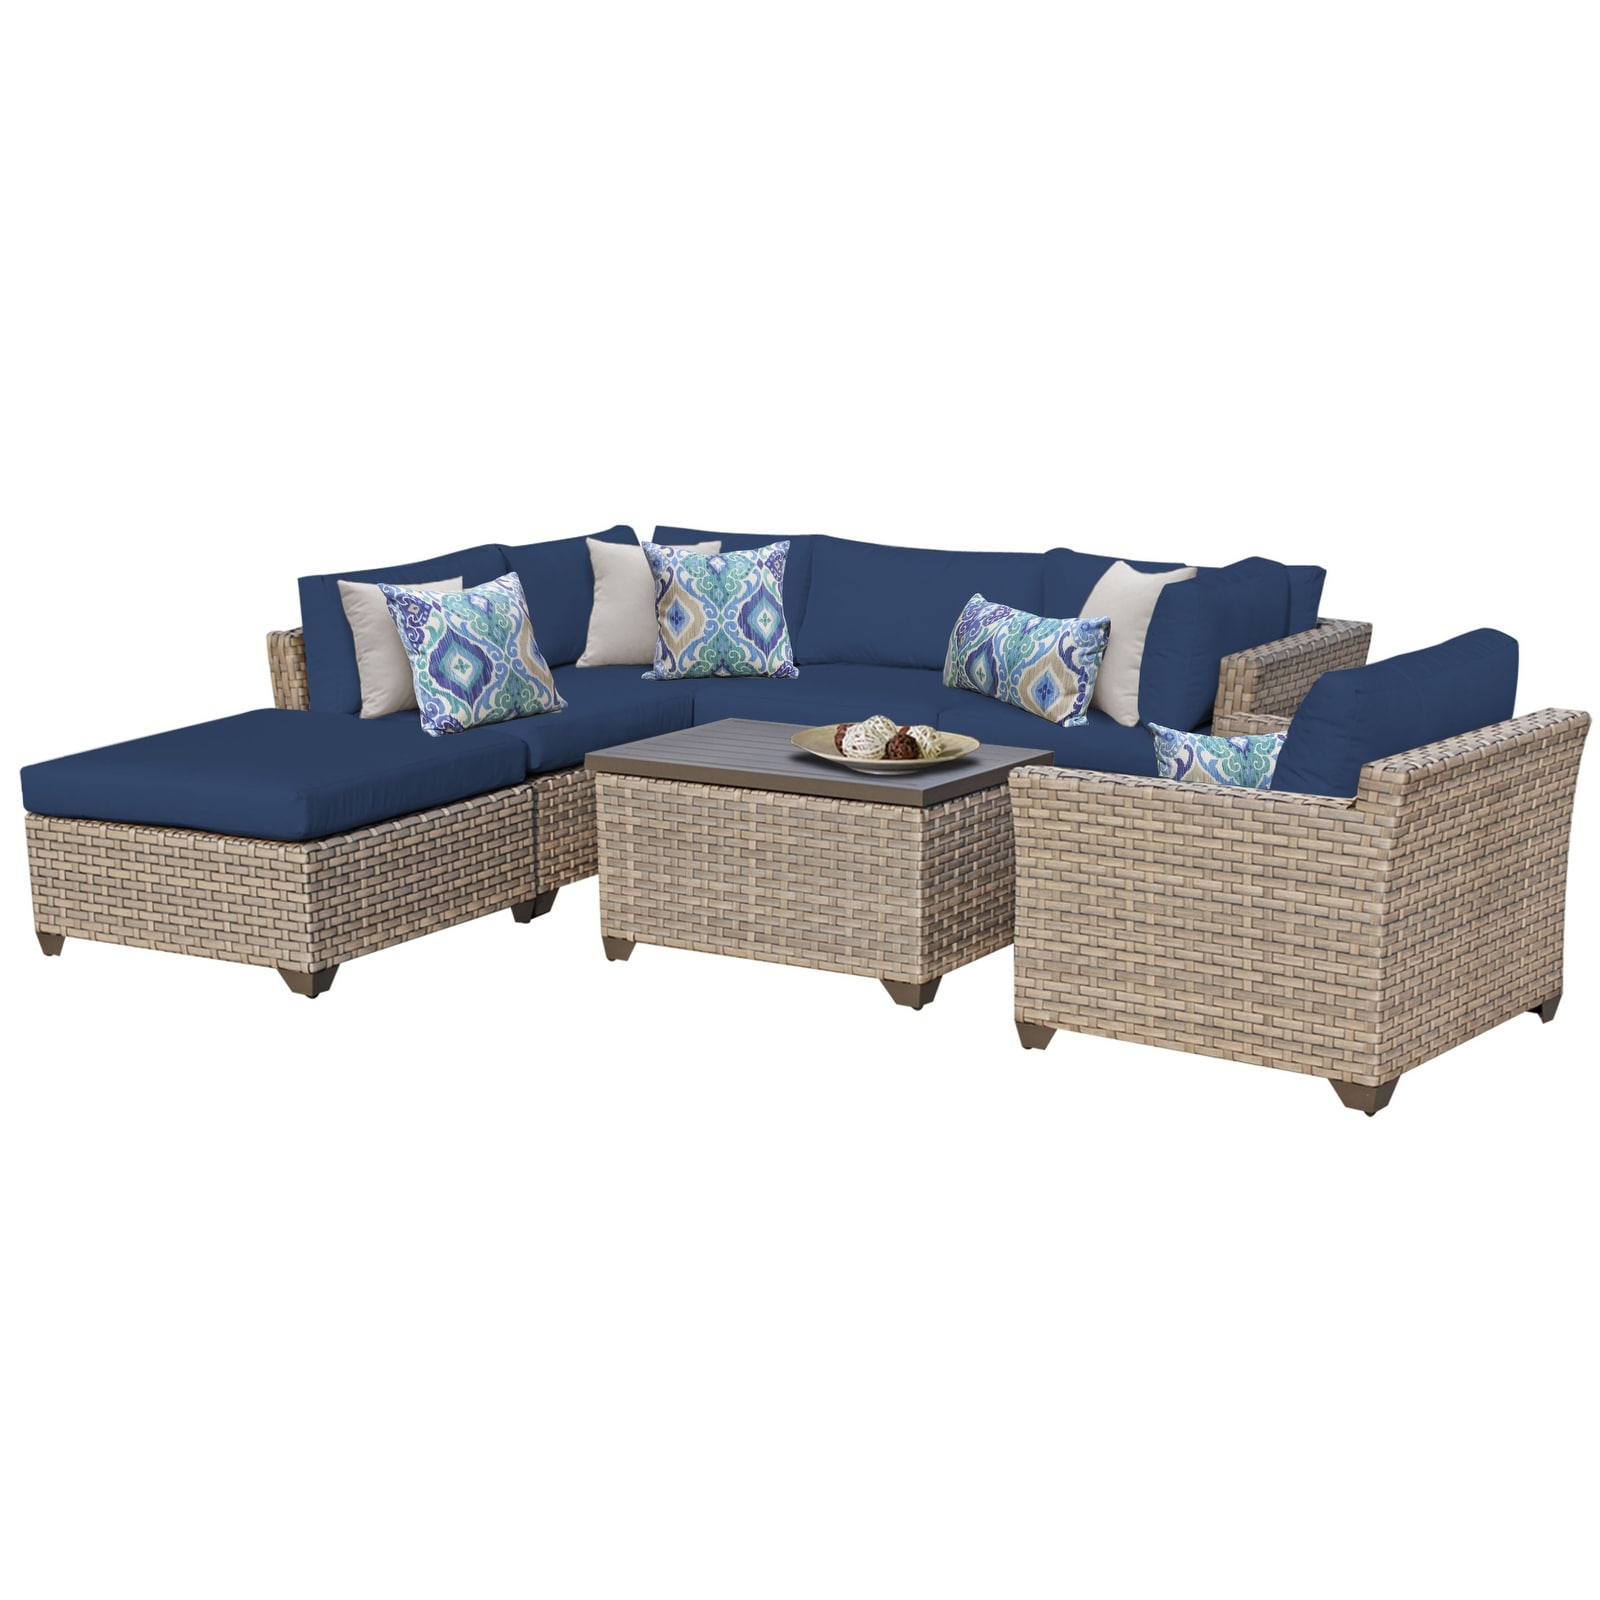 Monterey 7 Piece Wicker Outdoor Sectional Seating Group With Storage Coffee Table And Club Chair